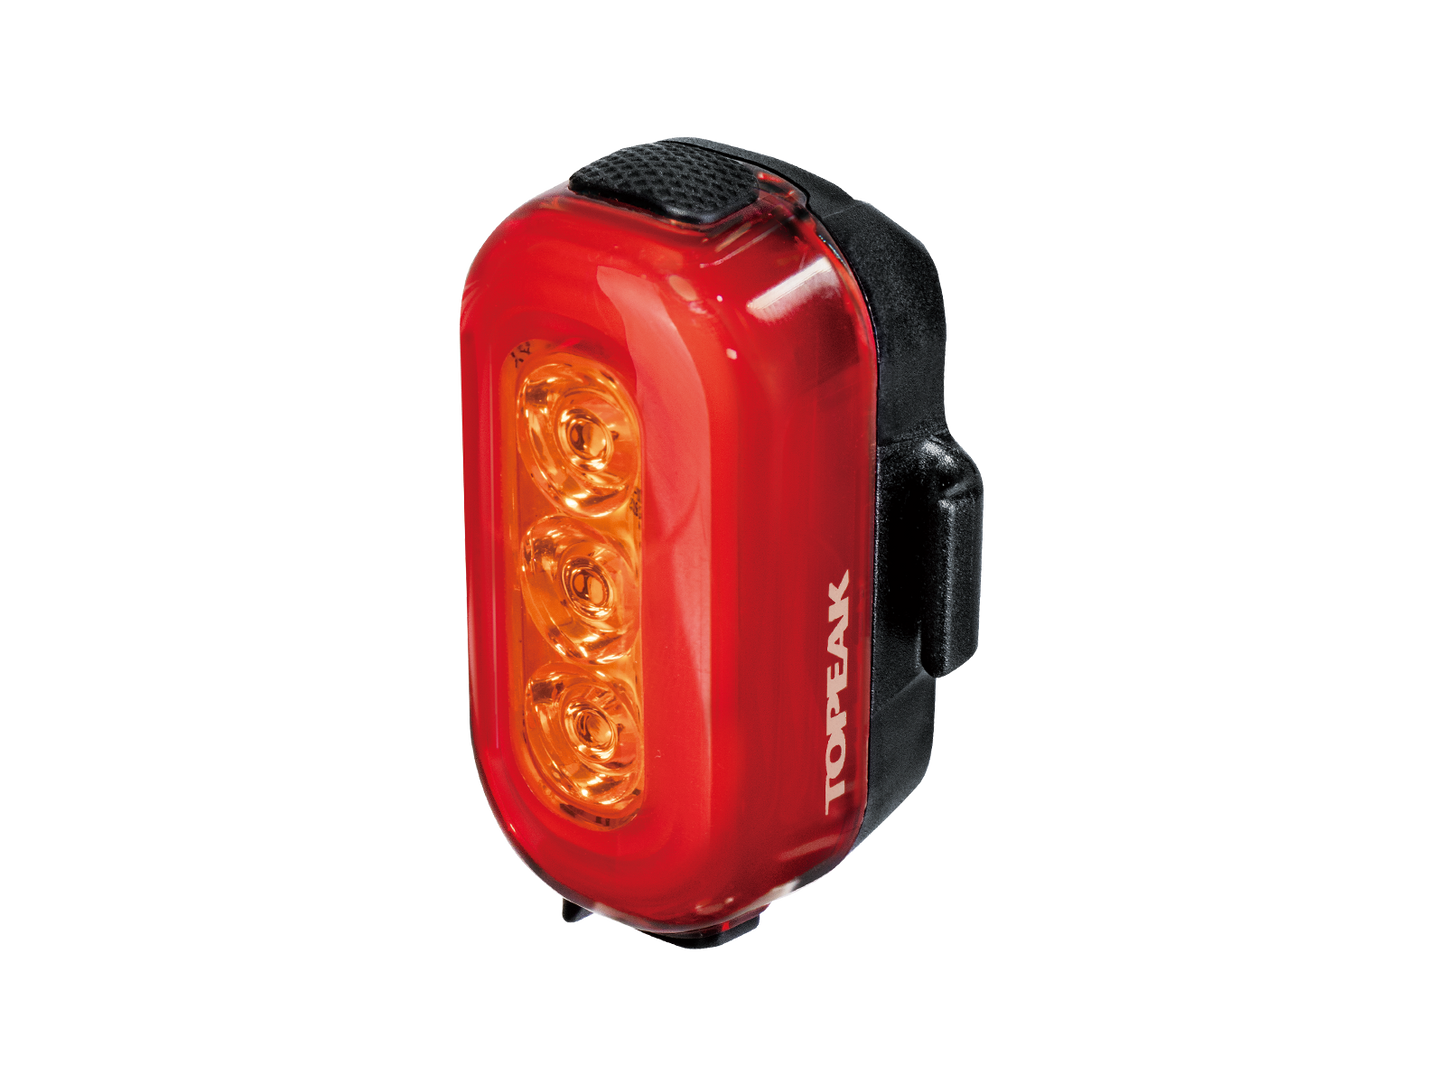 Topeak Taillux 100 USB 叉電後燈-紅/黃 / Topeak Taillux 100 USB Rechargeable Tail Light-R/Y, TMS093RY